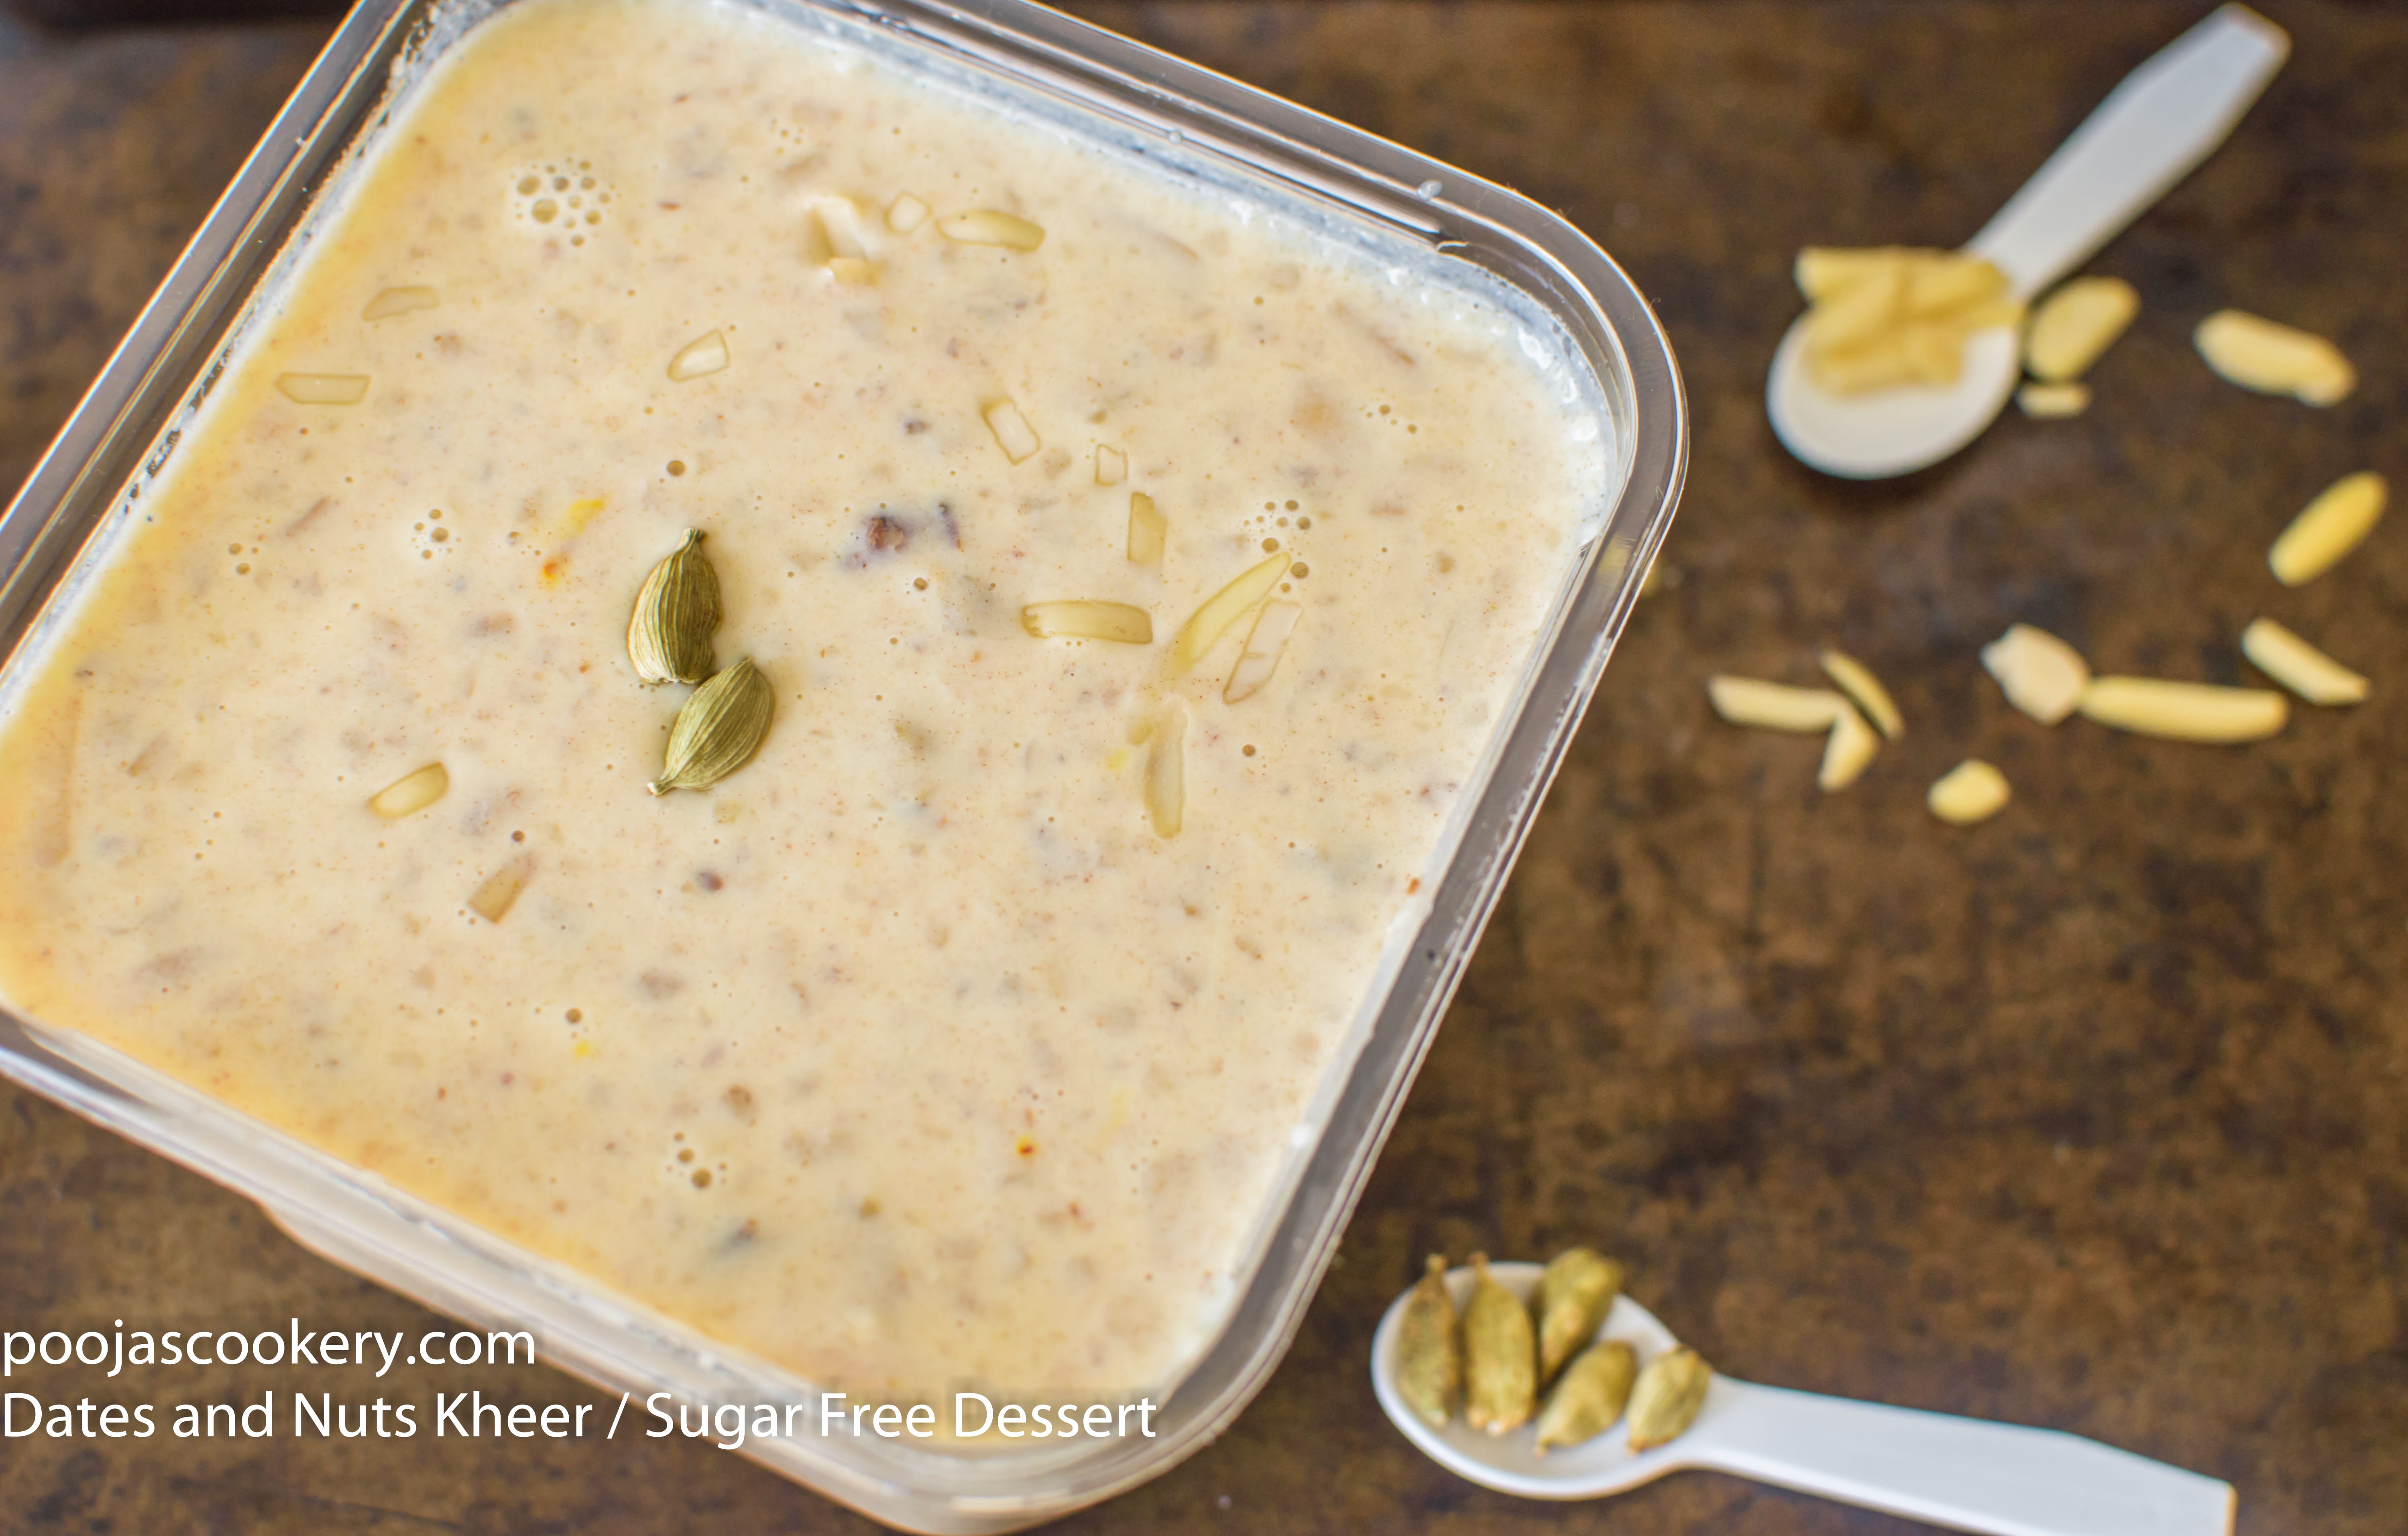 Dates and Nuts Kheer / Sugar Free Dessert – Pooja's Cookery